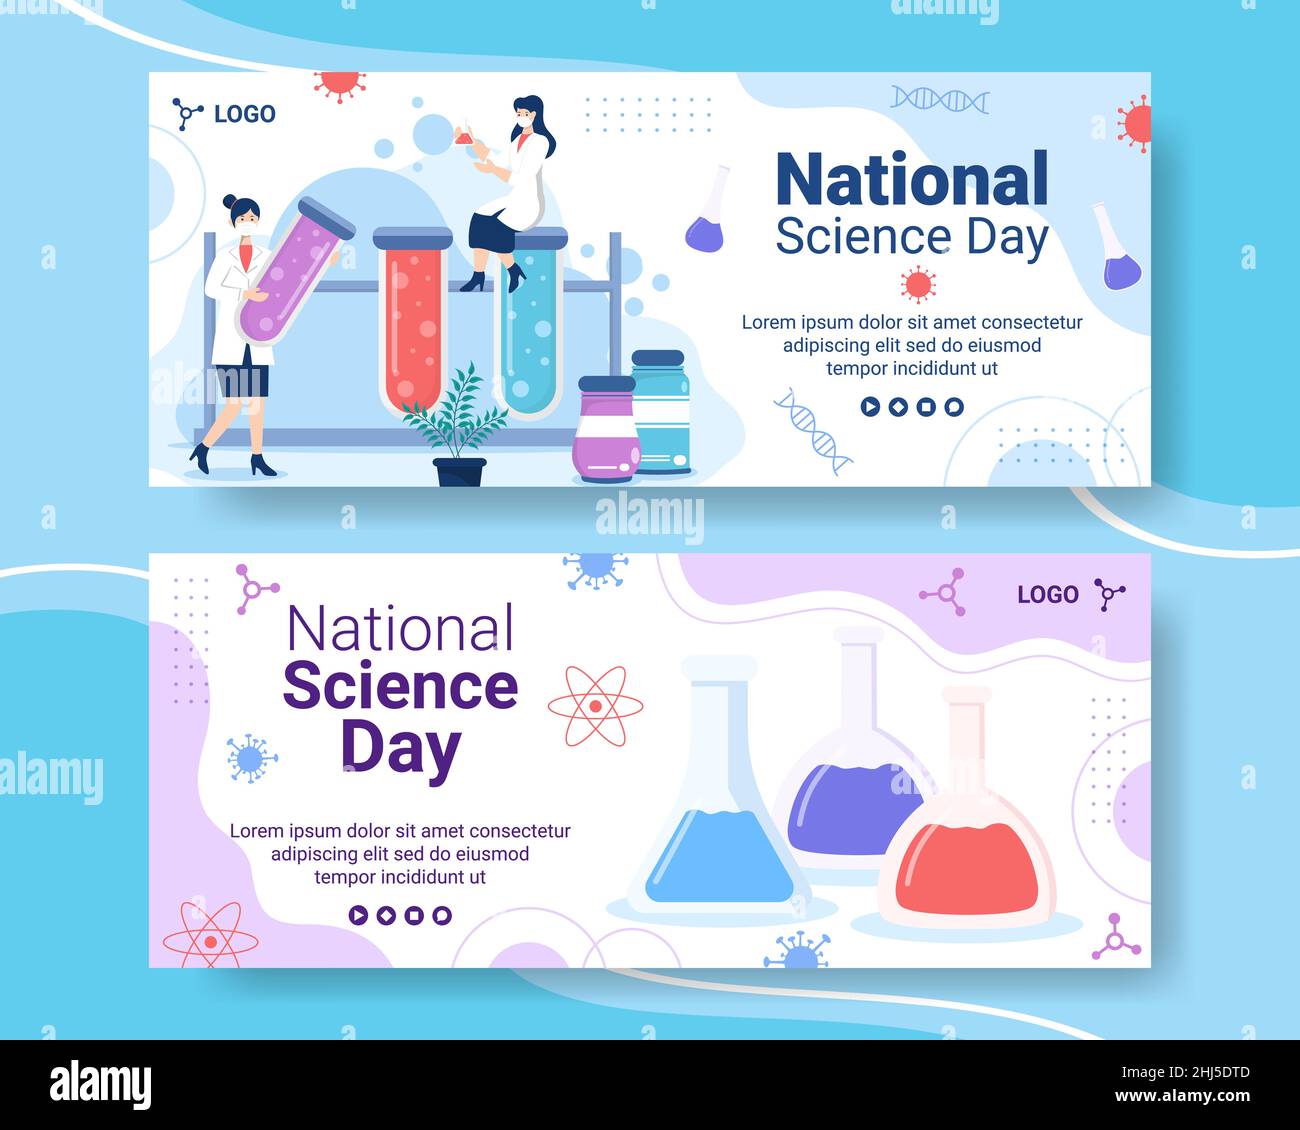 National Science Day Banner Template Flat Design Illustration Editable of Square Background Suitable for Social Media or Greeting Card Stock Vector